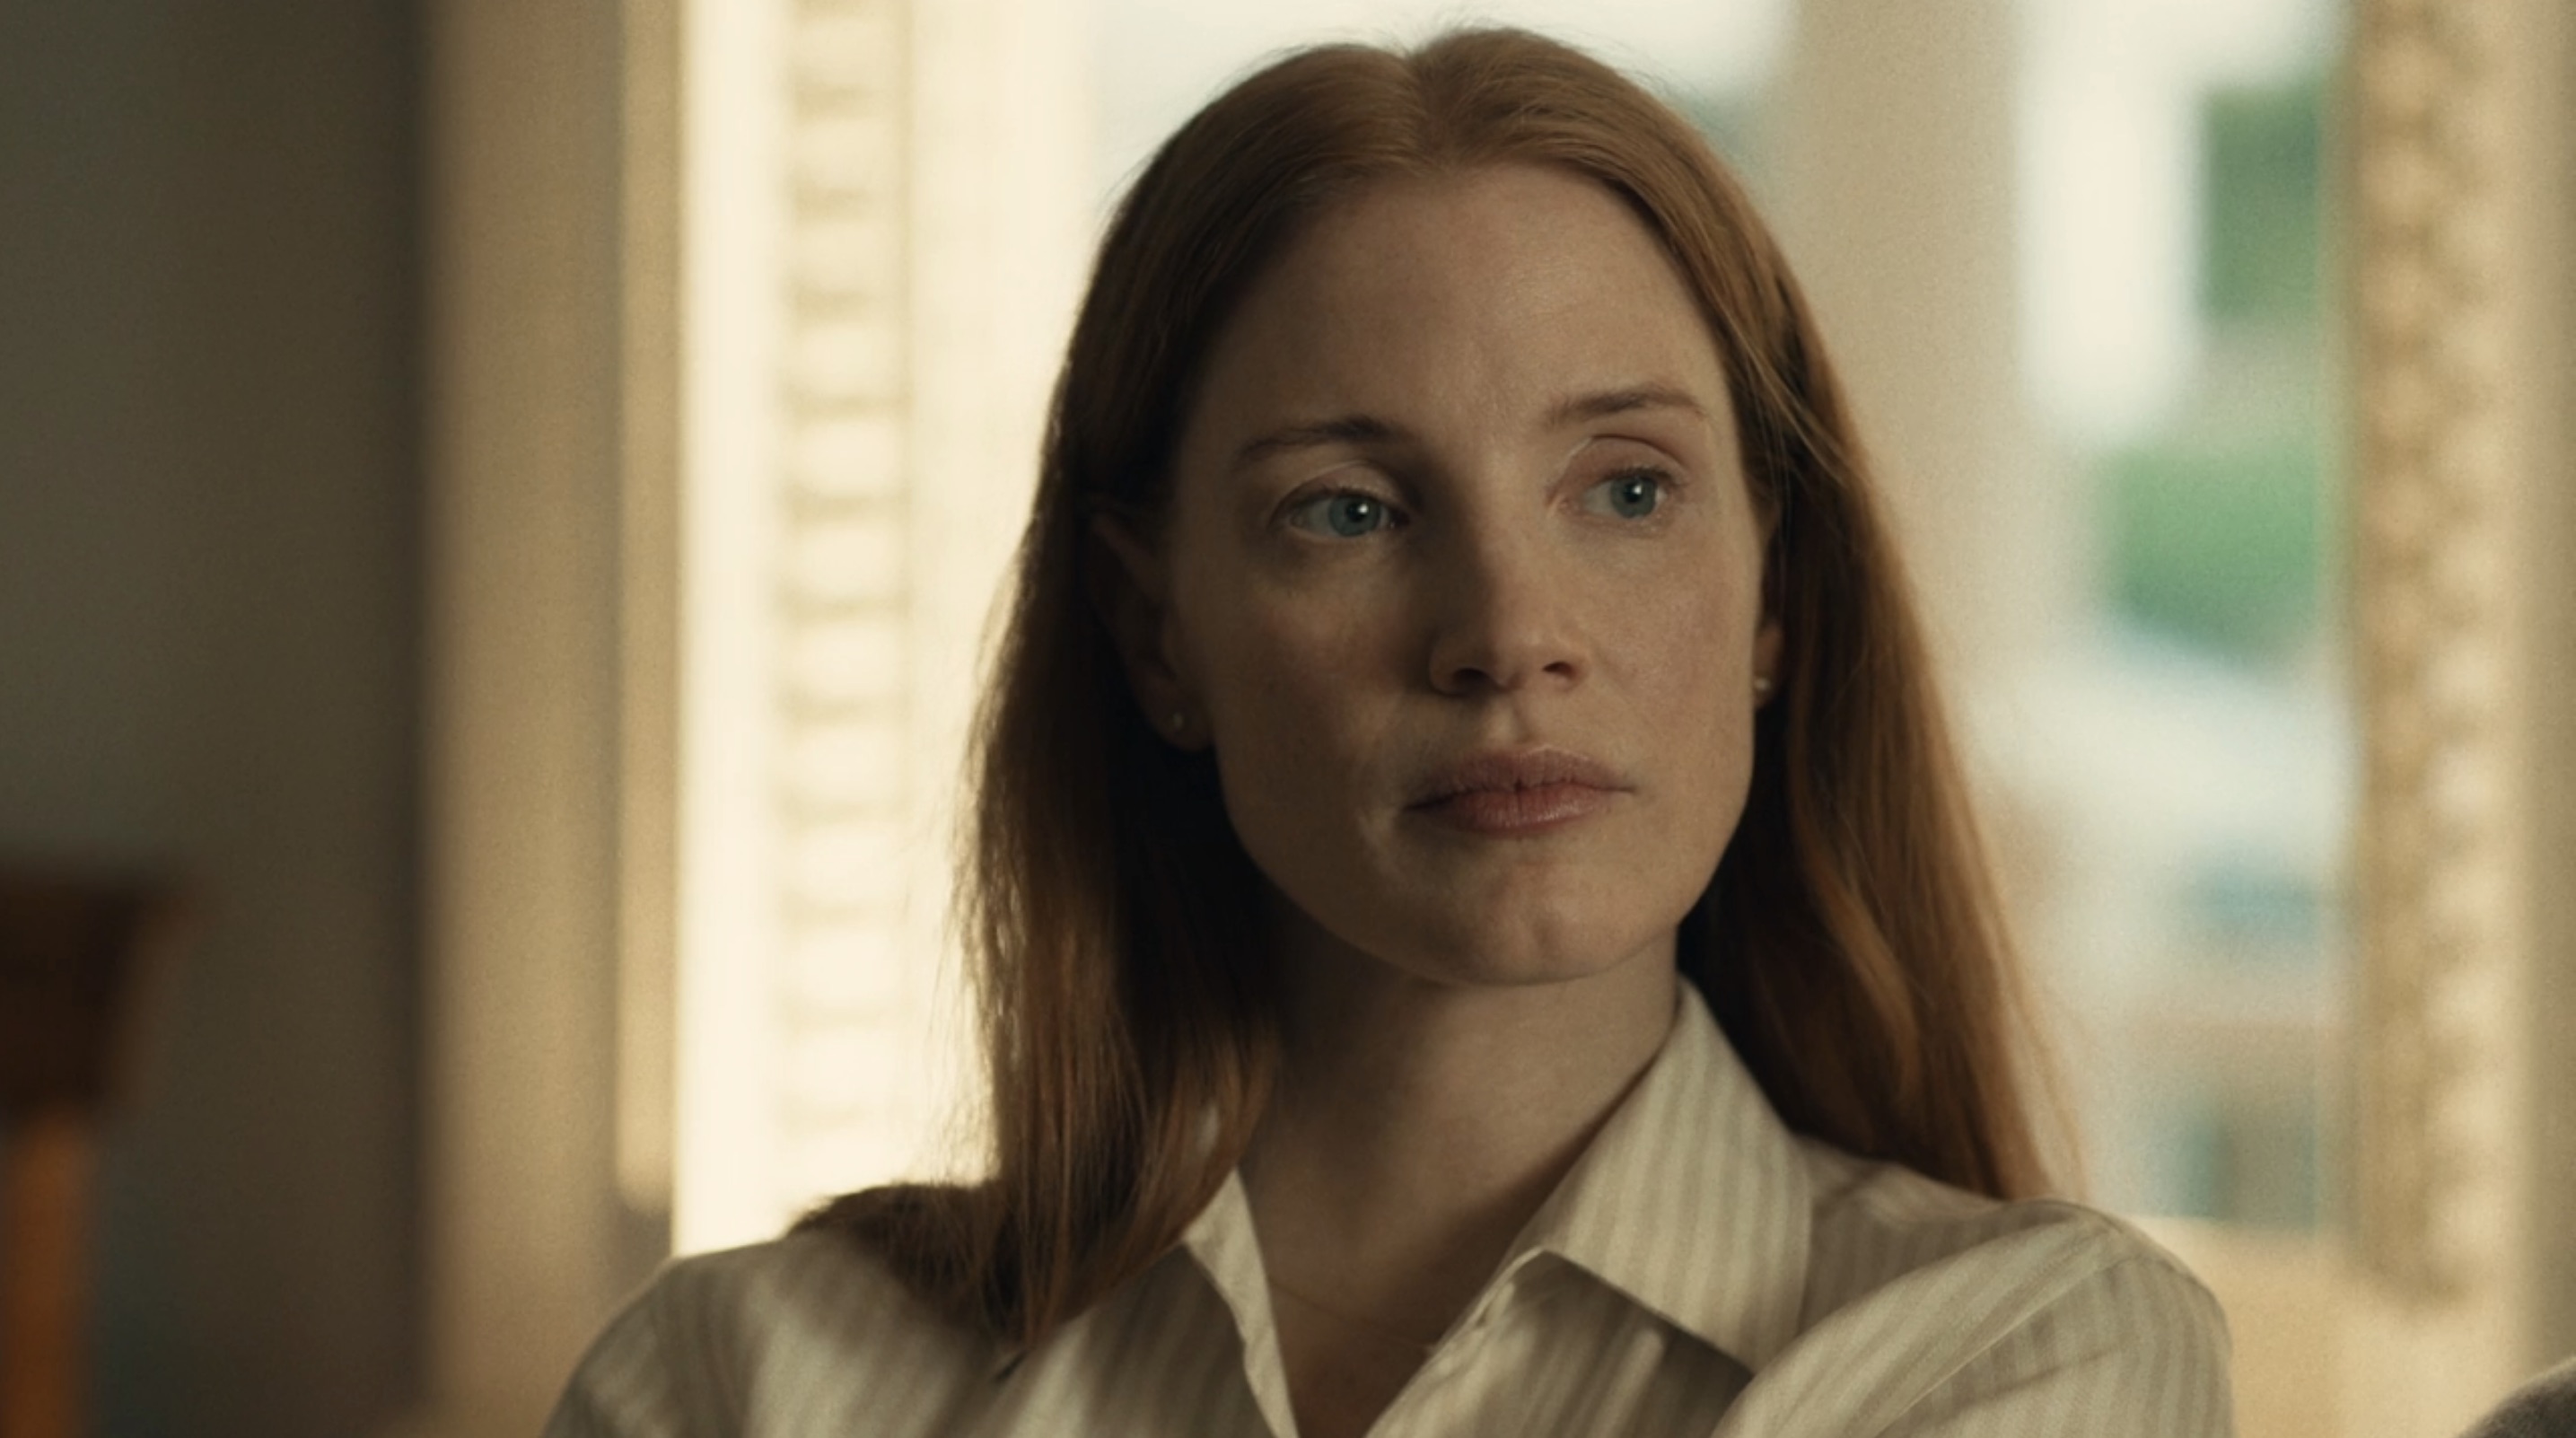 Scenes from a Marriage Cast on HBO - Jessica Chastain as Mira